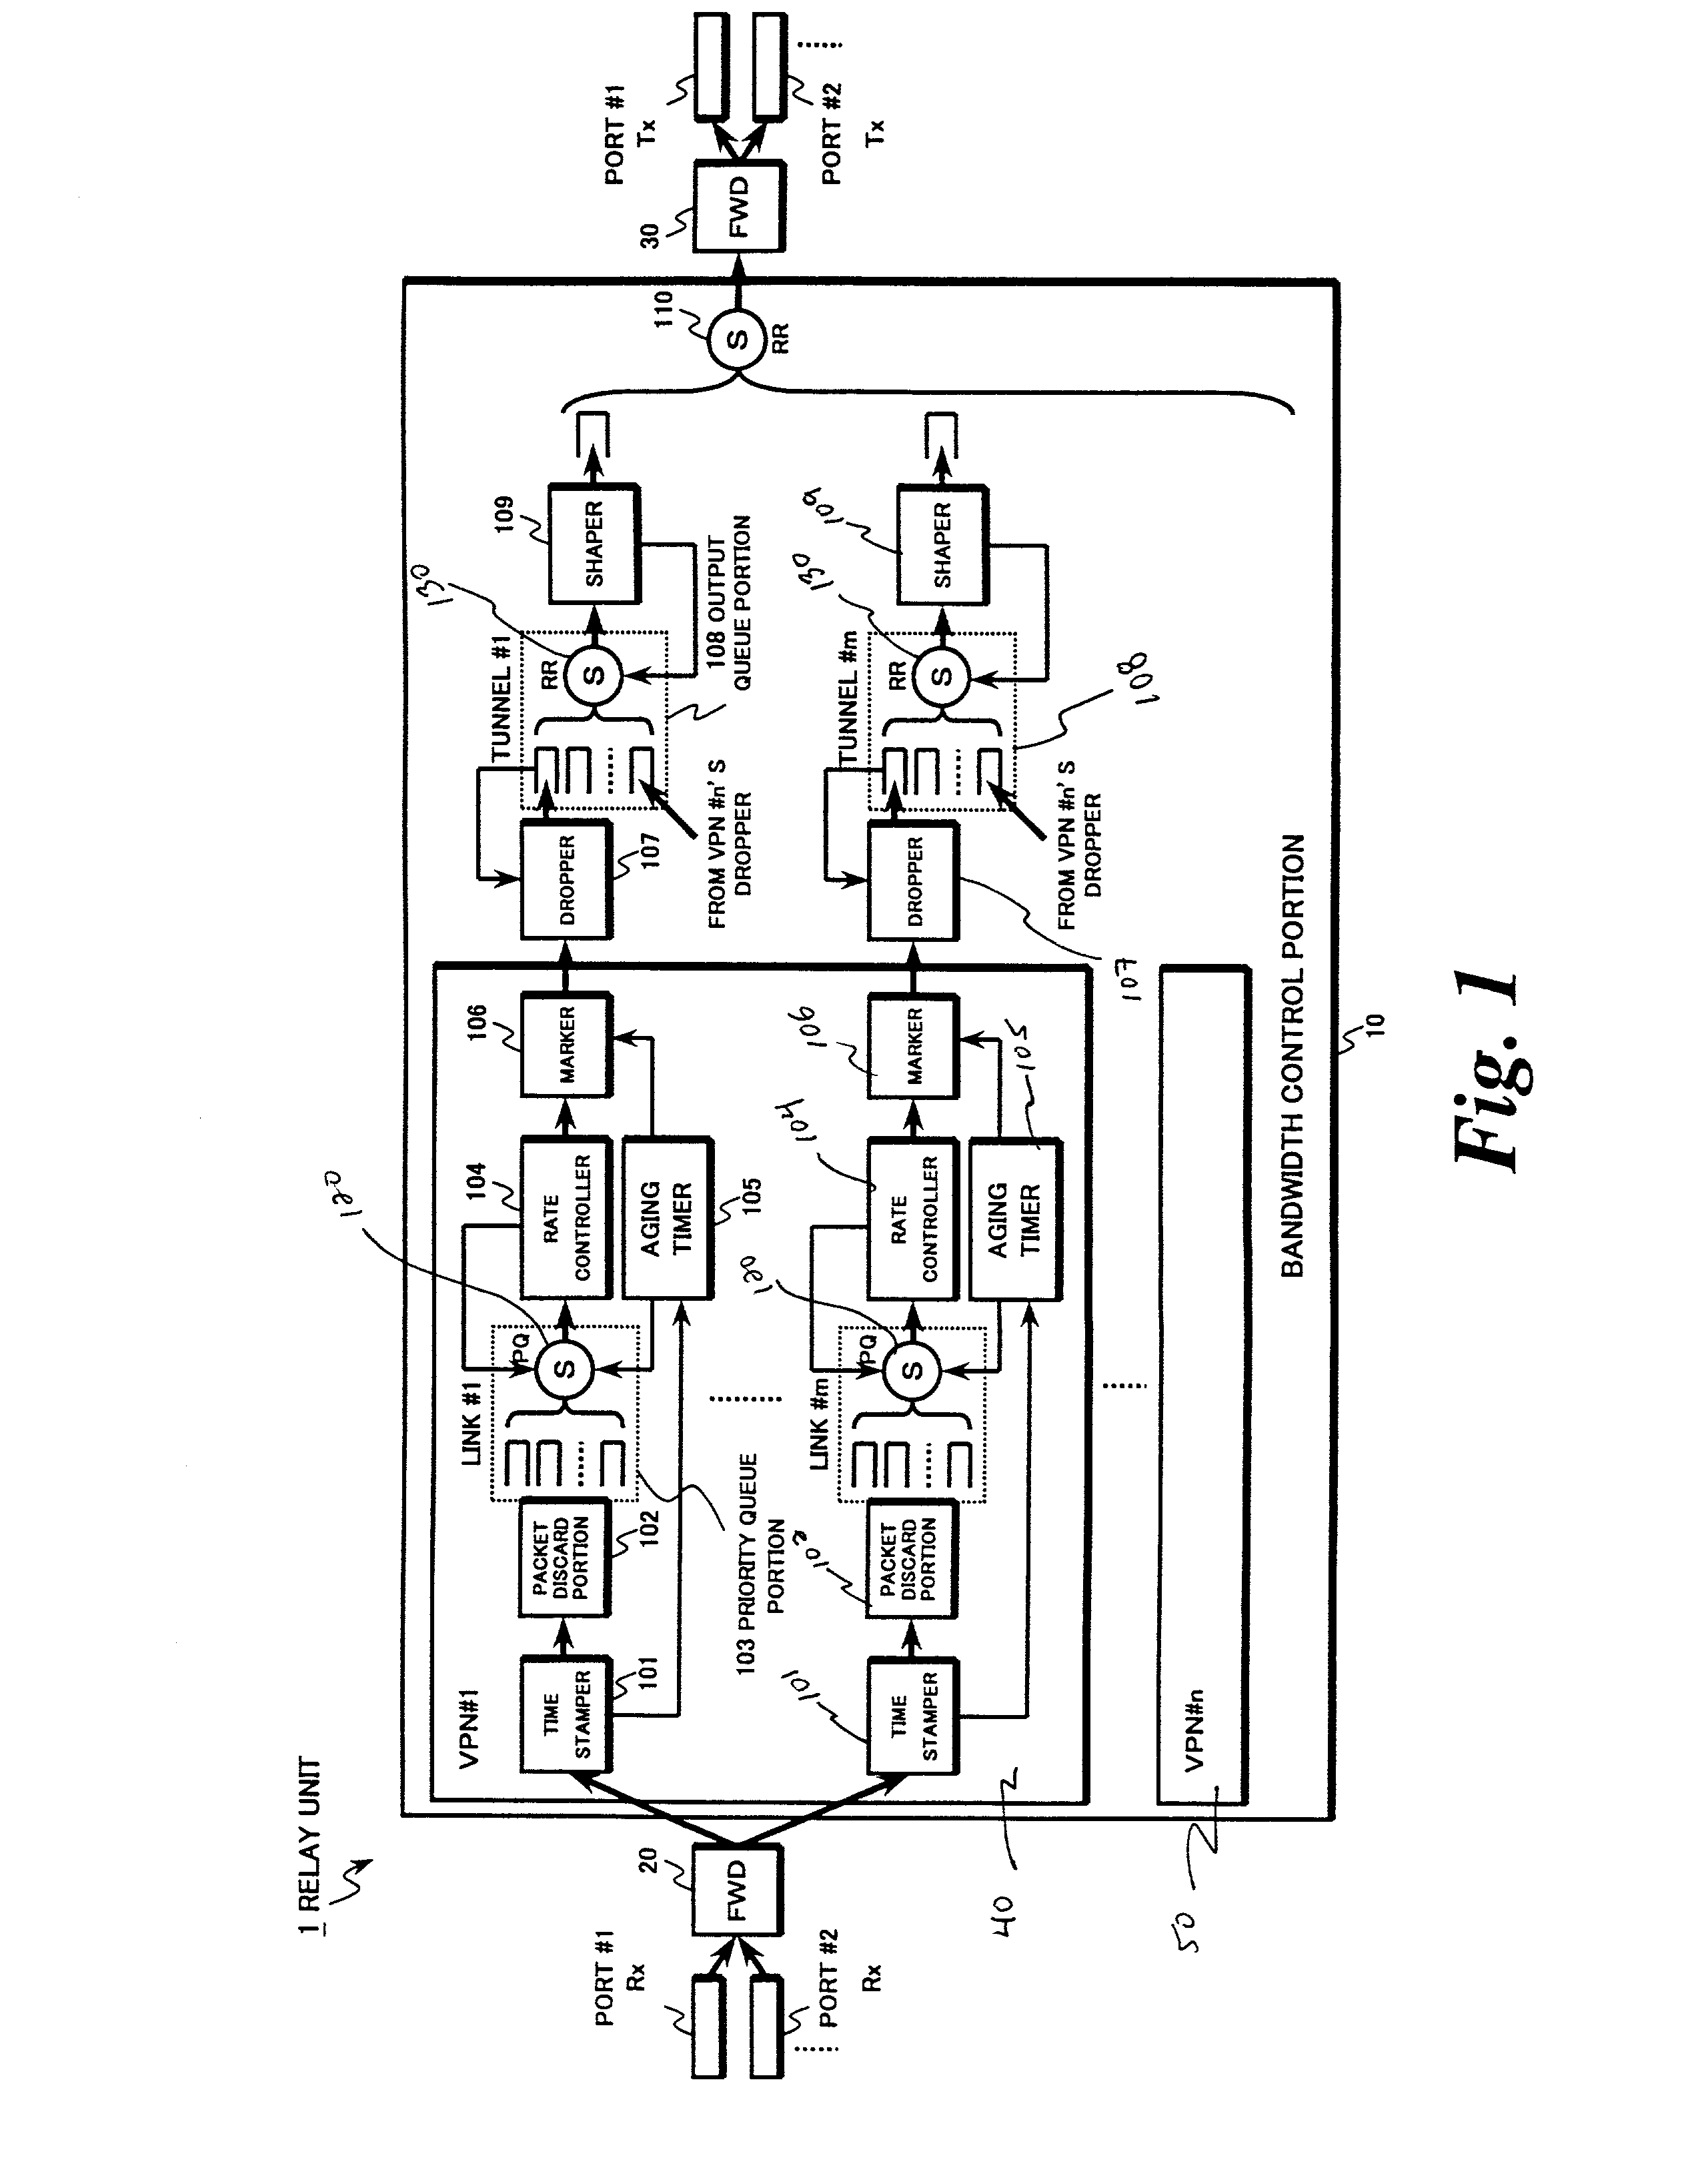 Inter-network relay system and method